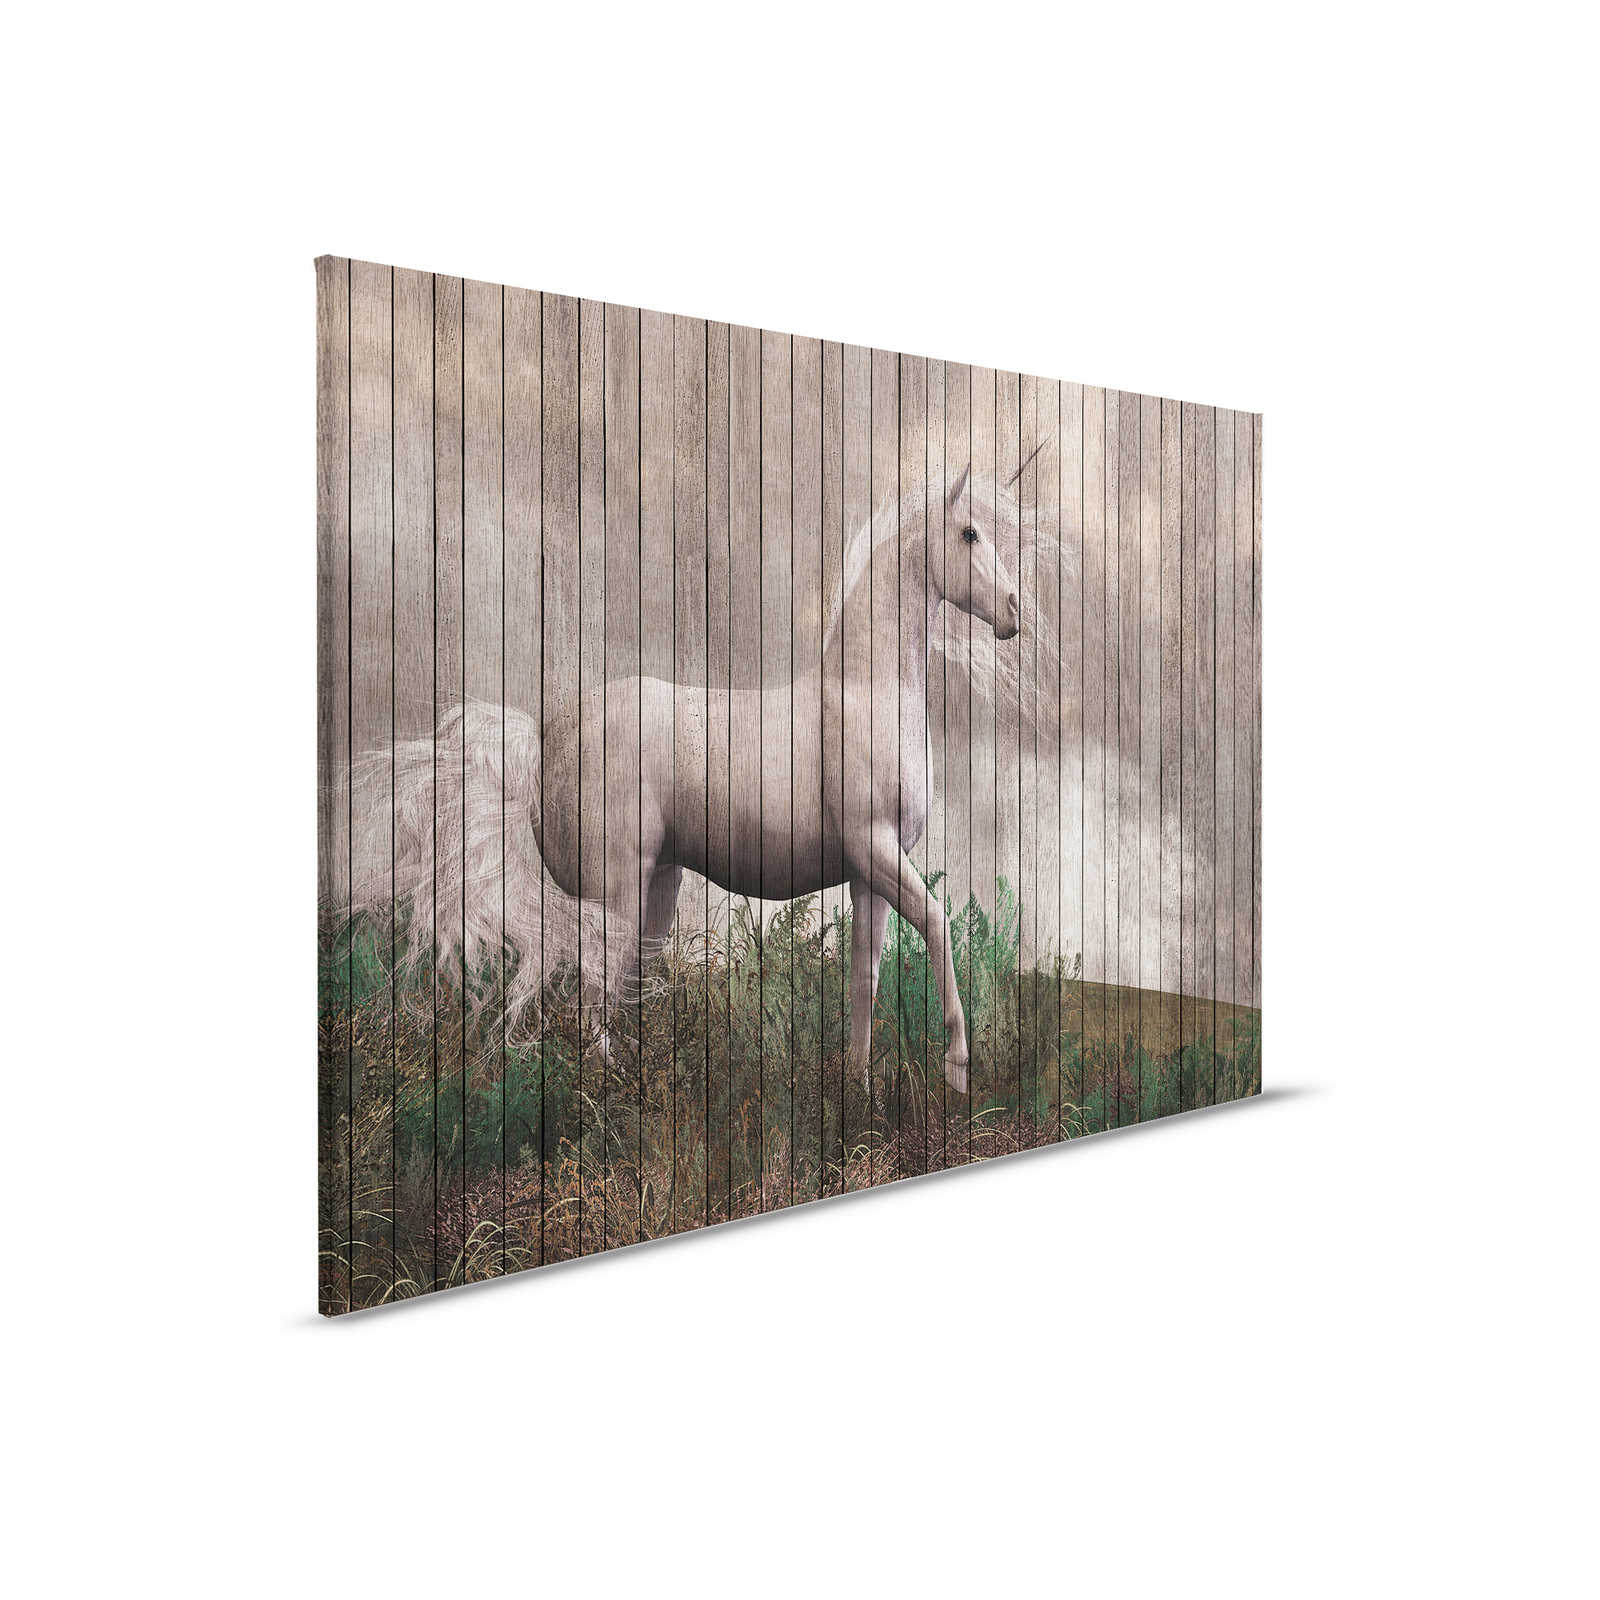         Fantasy 3 - Unicorn canvas picture with wooden board look - 0.90 m x 0.60 m
    